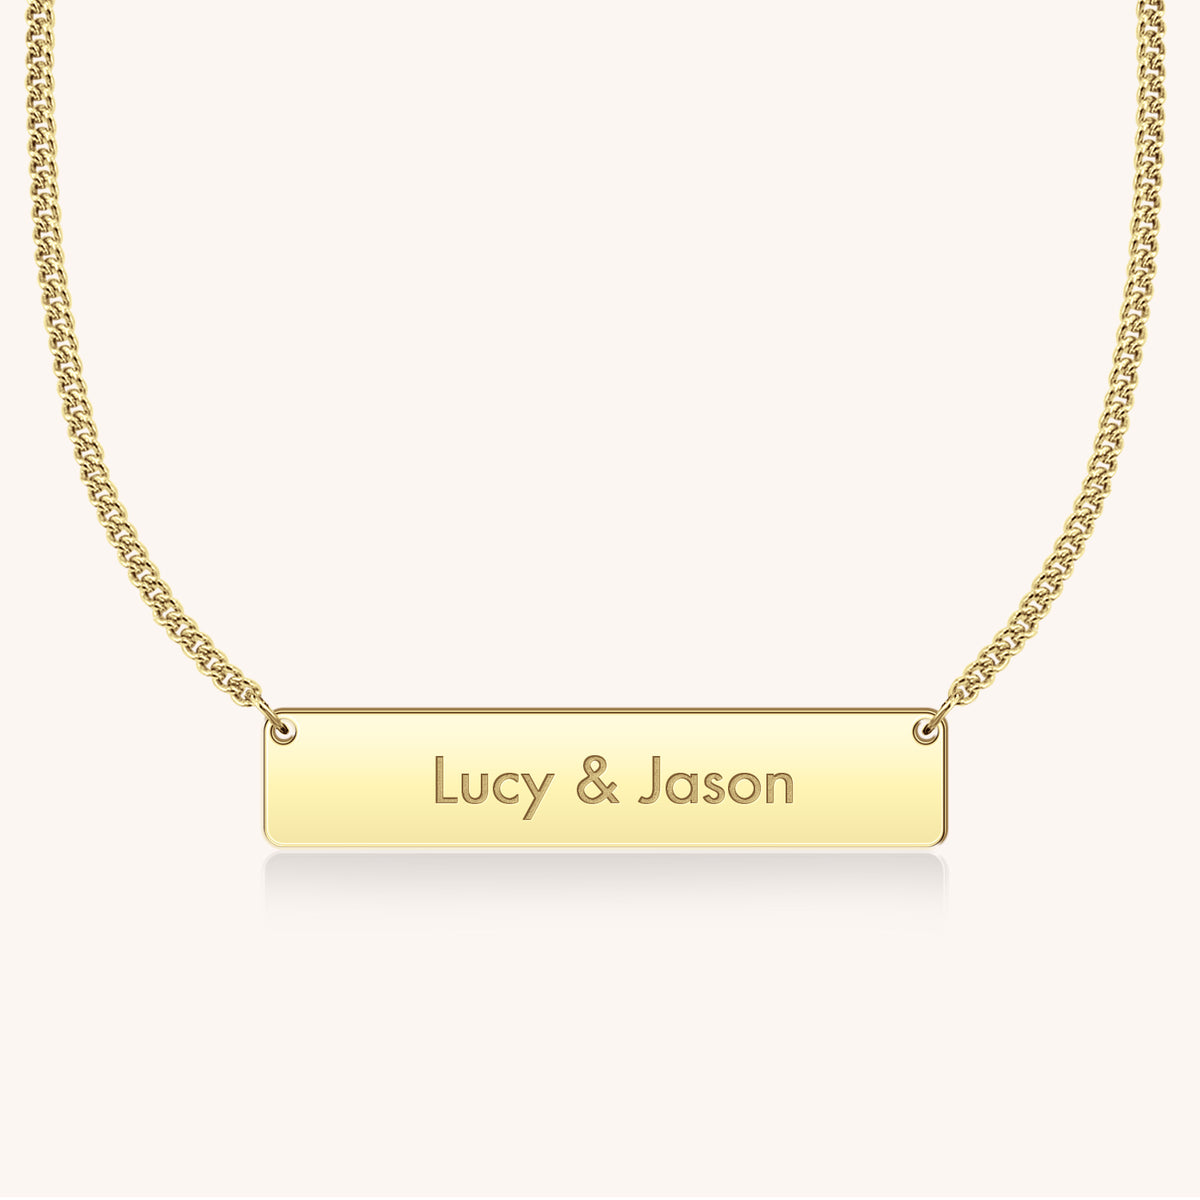 I Love You Bar Necklace in Block